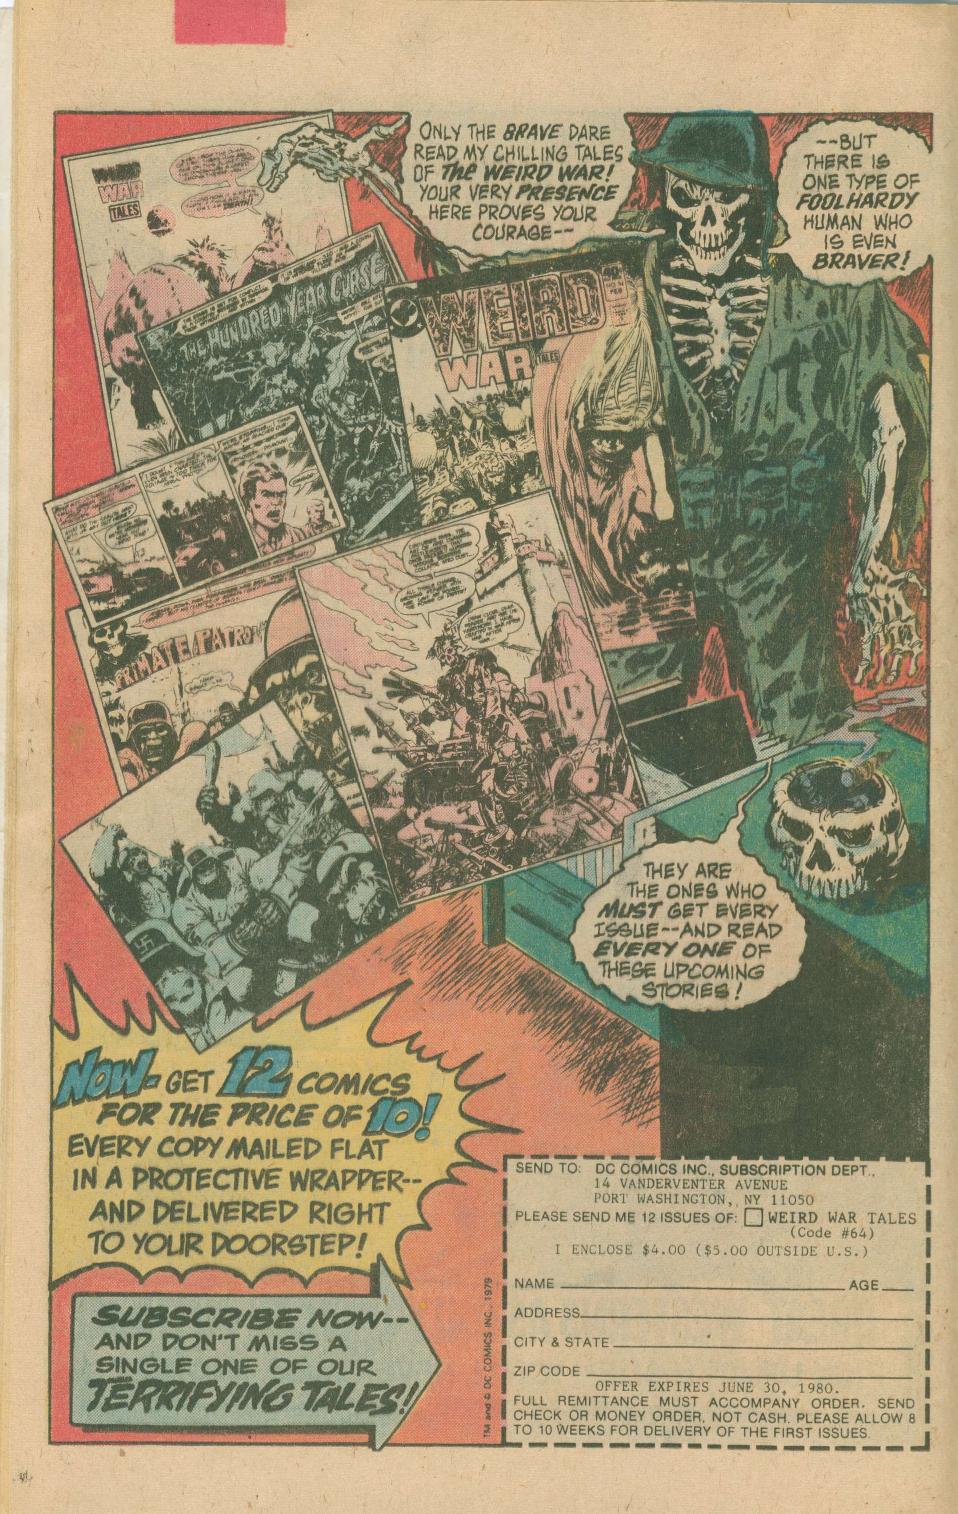 Weird War Tales subscription ad from GHOSTS #89